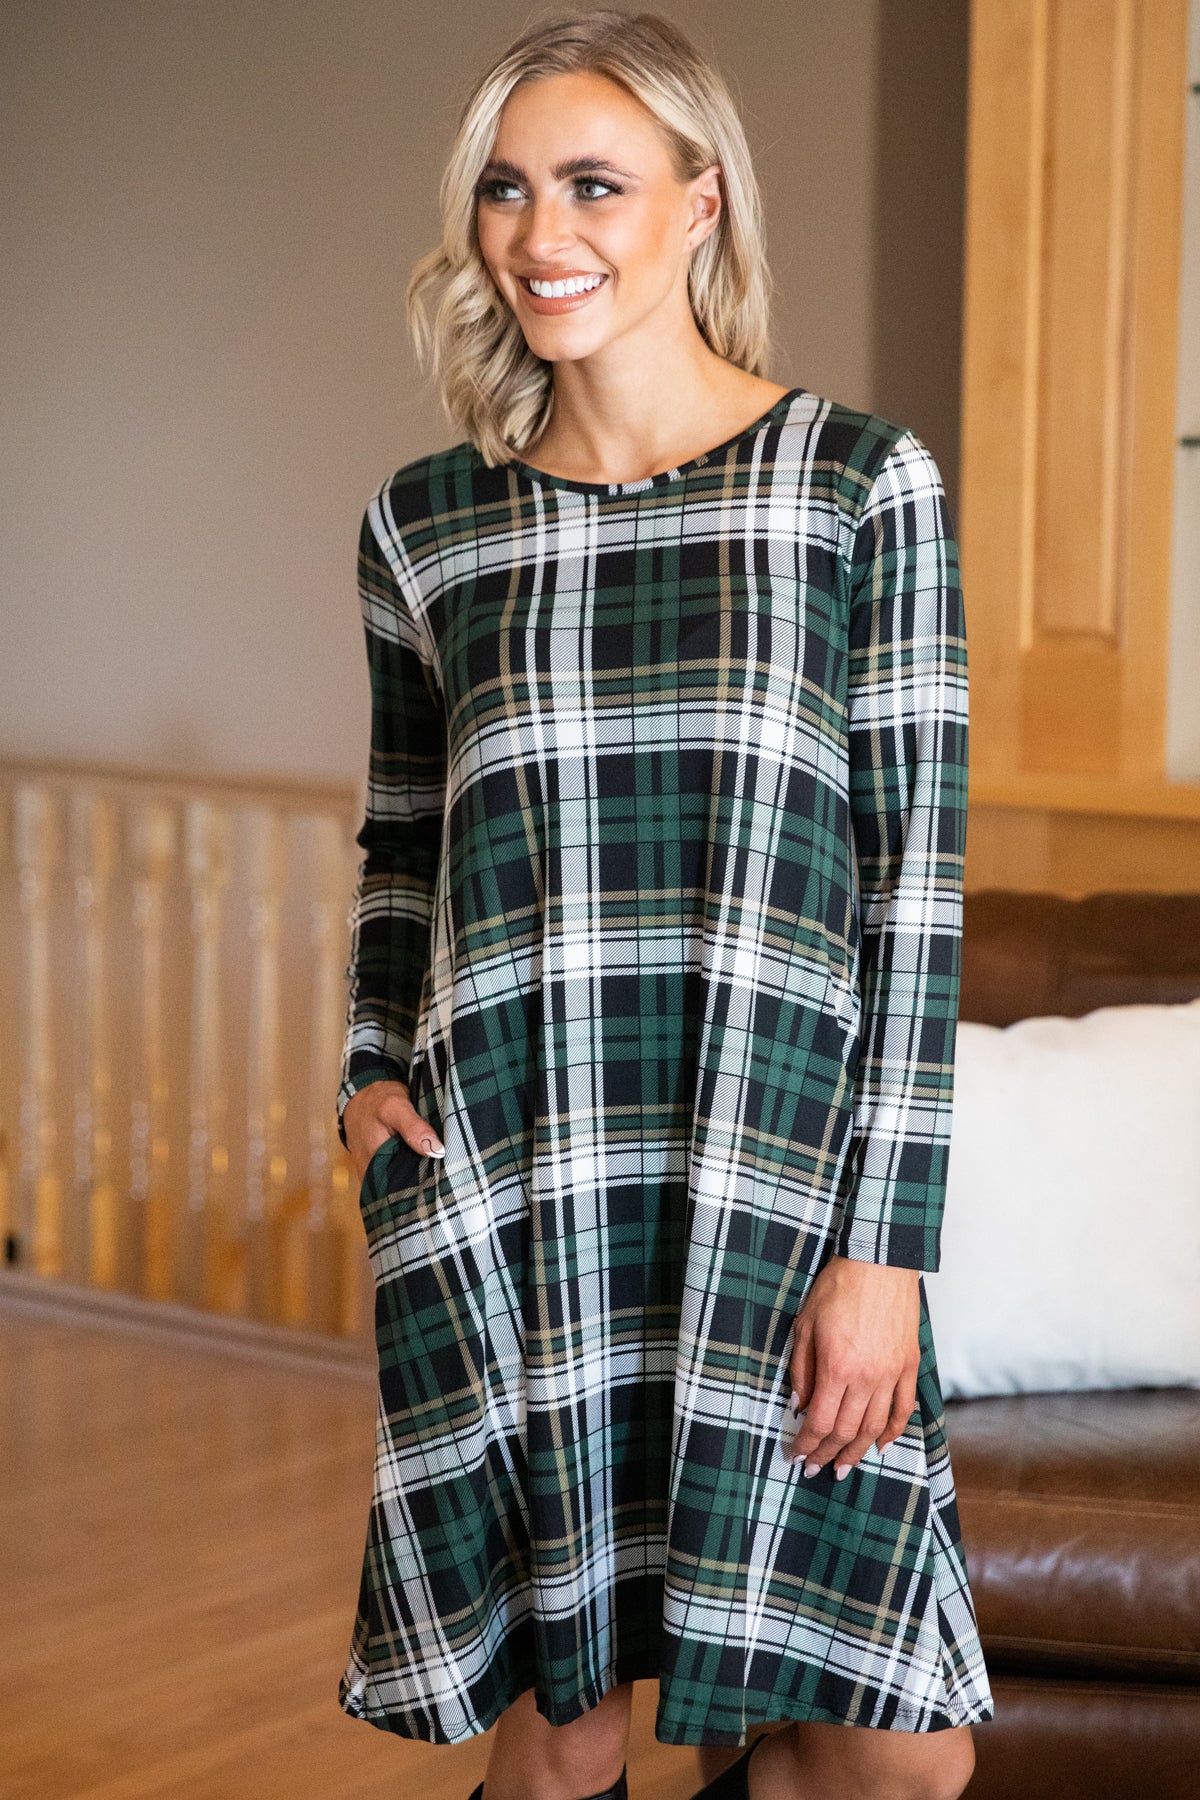 Hunter Green and Black Plaid Dress - Filly Flair